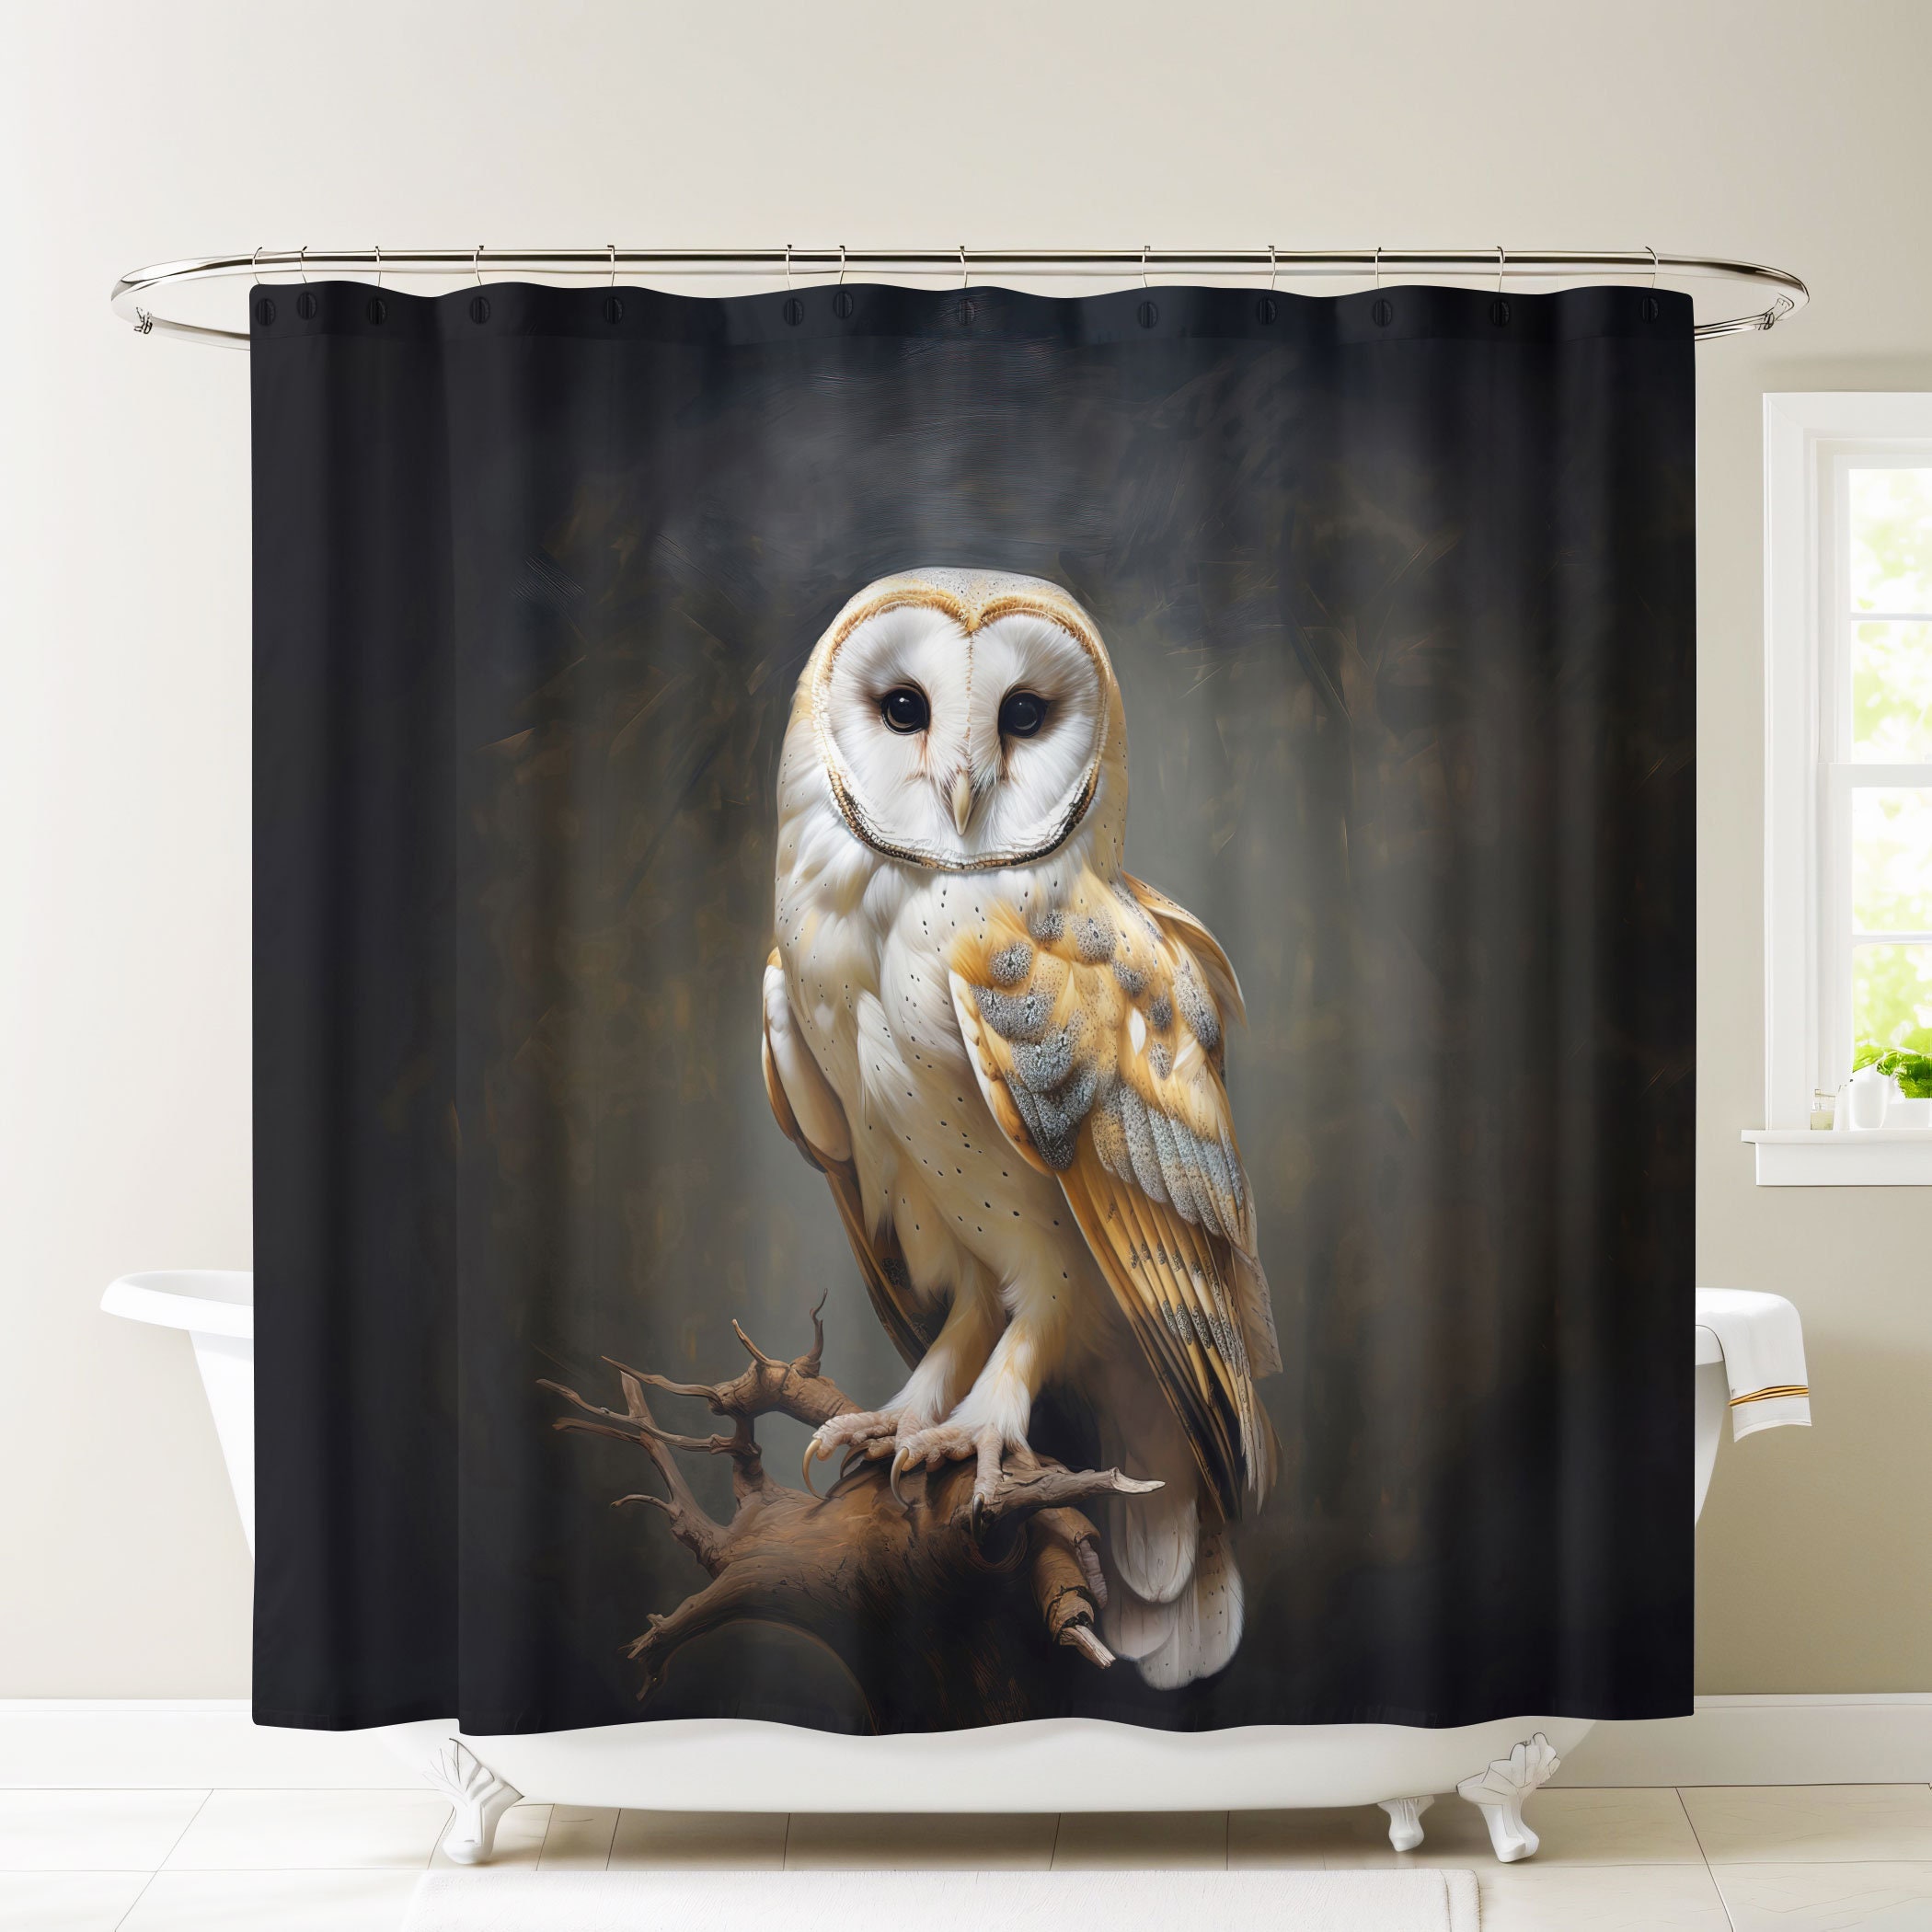 Regal Owl Shower Curtain, Forest Bathroom Decor, Luxury Fabric Water Resistant Weighted Shower Curta